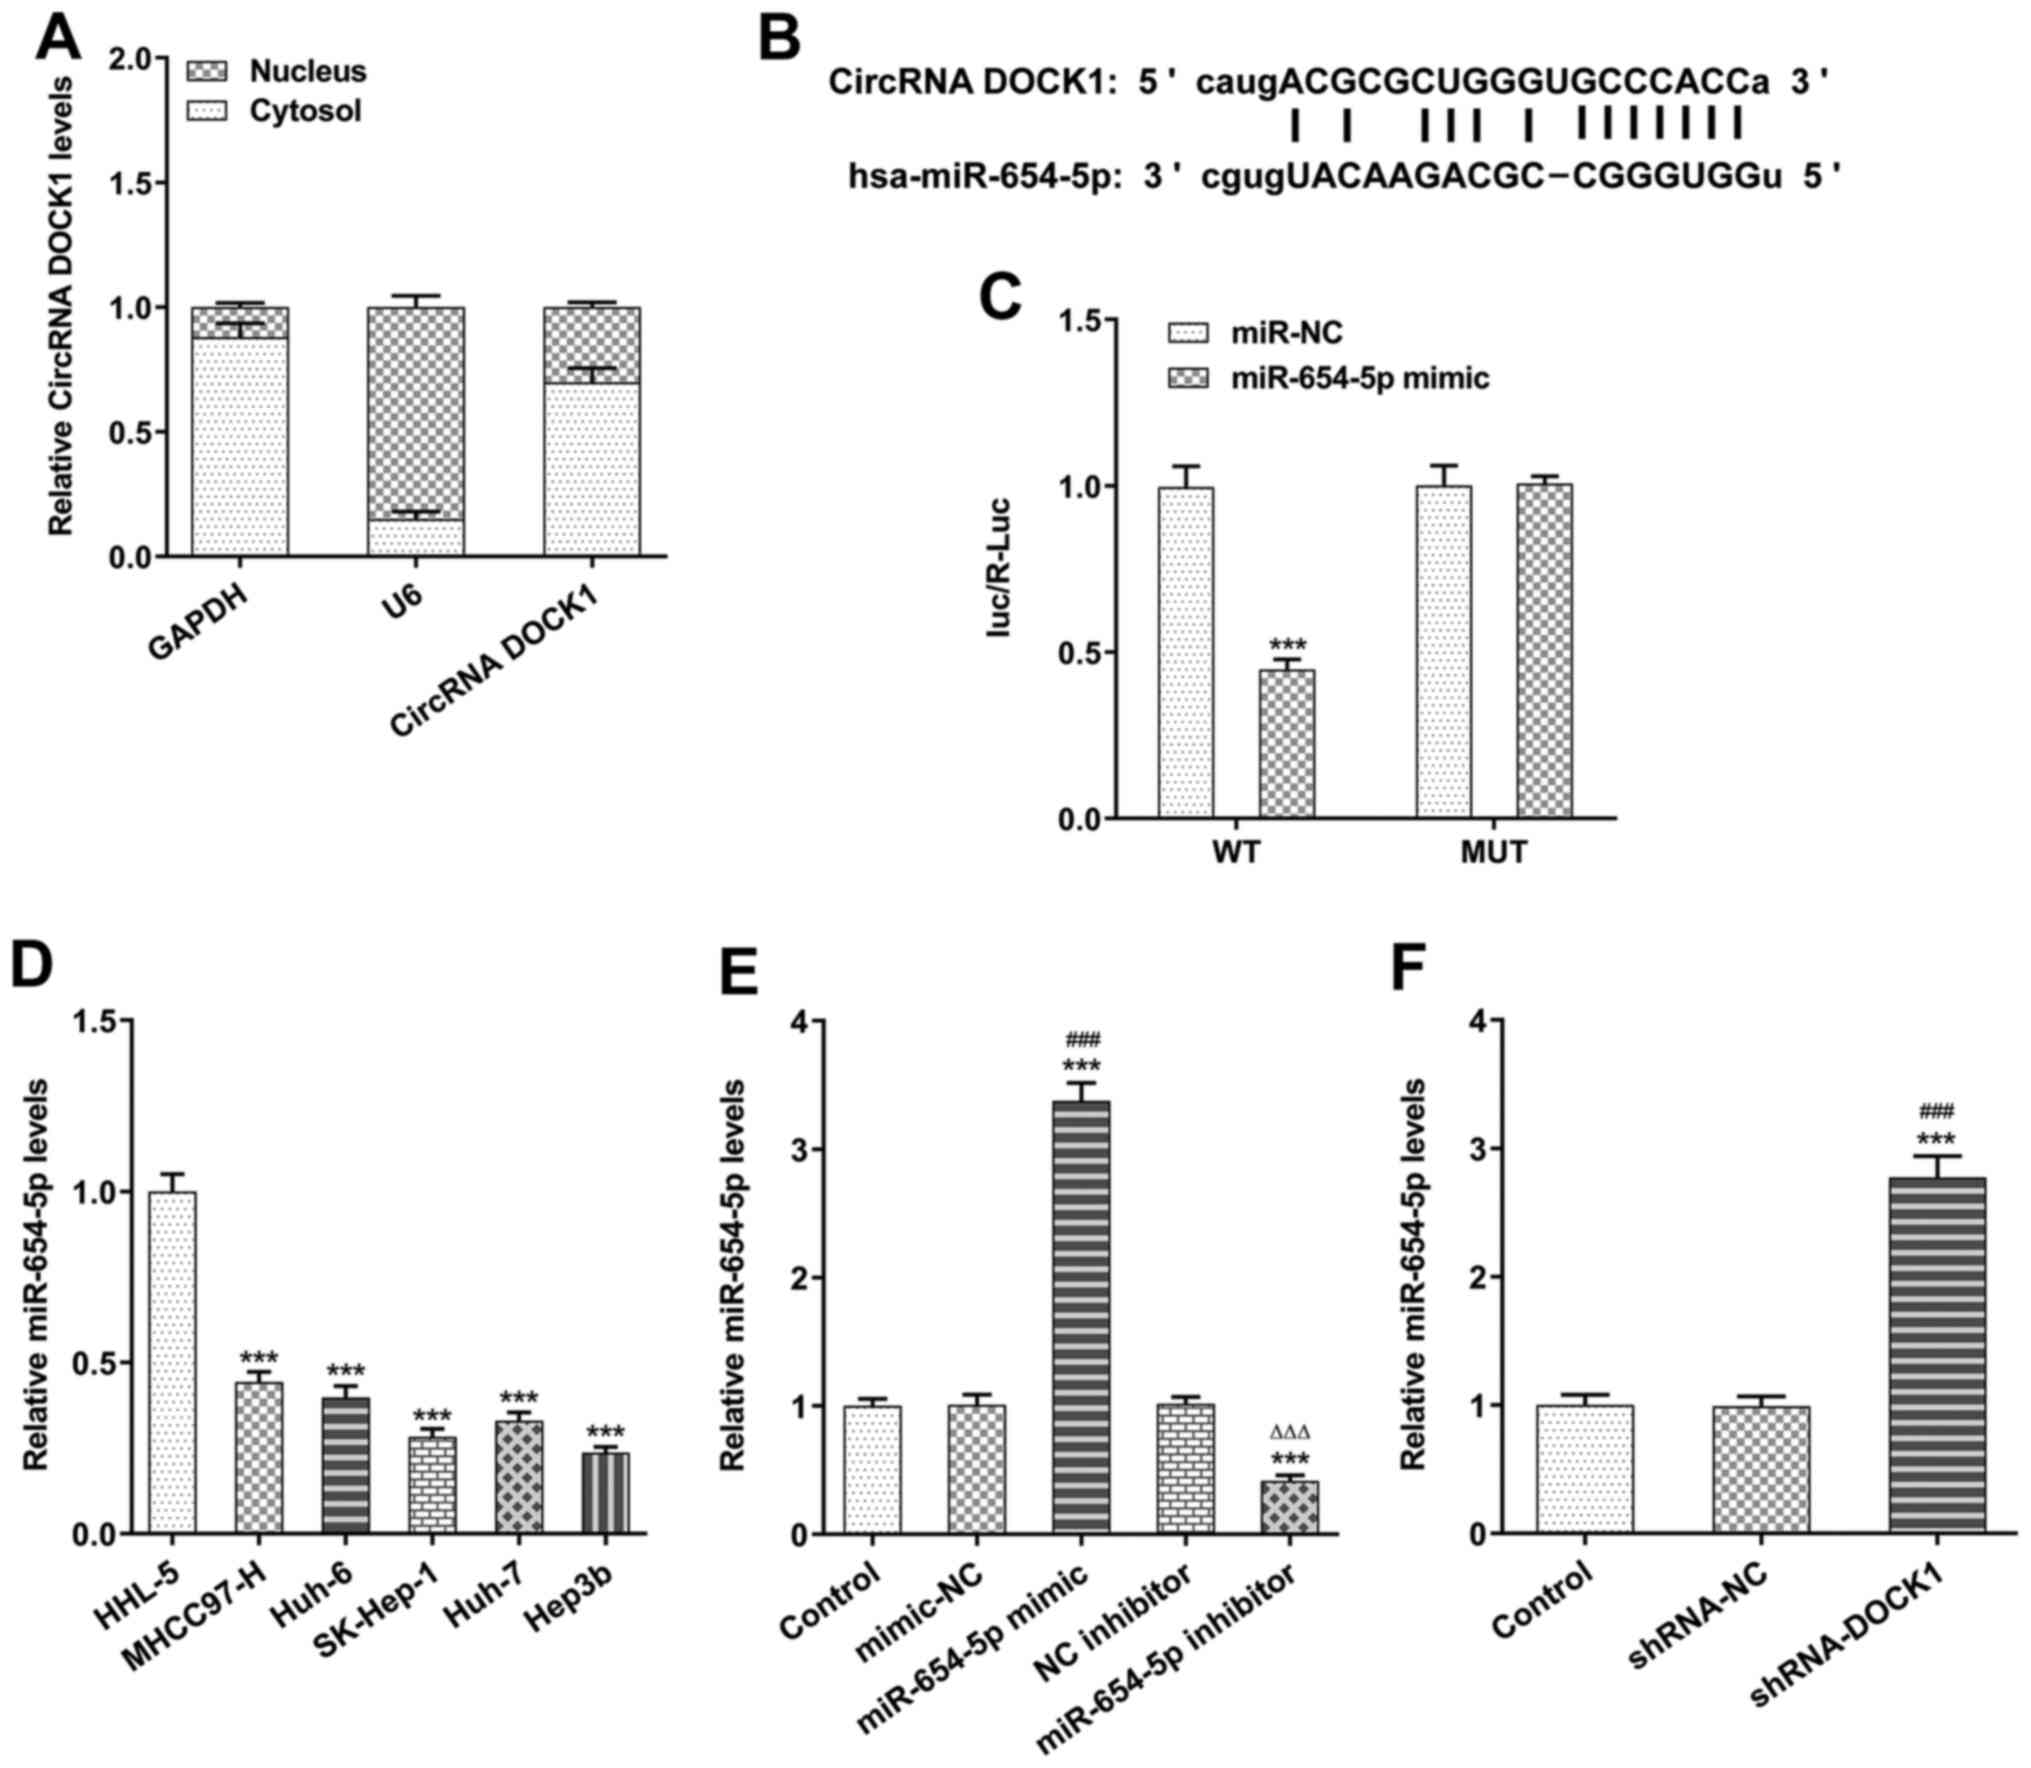 Interference With Circrna Dock1 Inhibits Hepatocellular Carcinoma Cell Proliferation Invasion